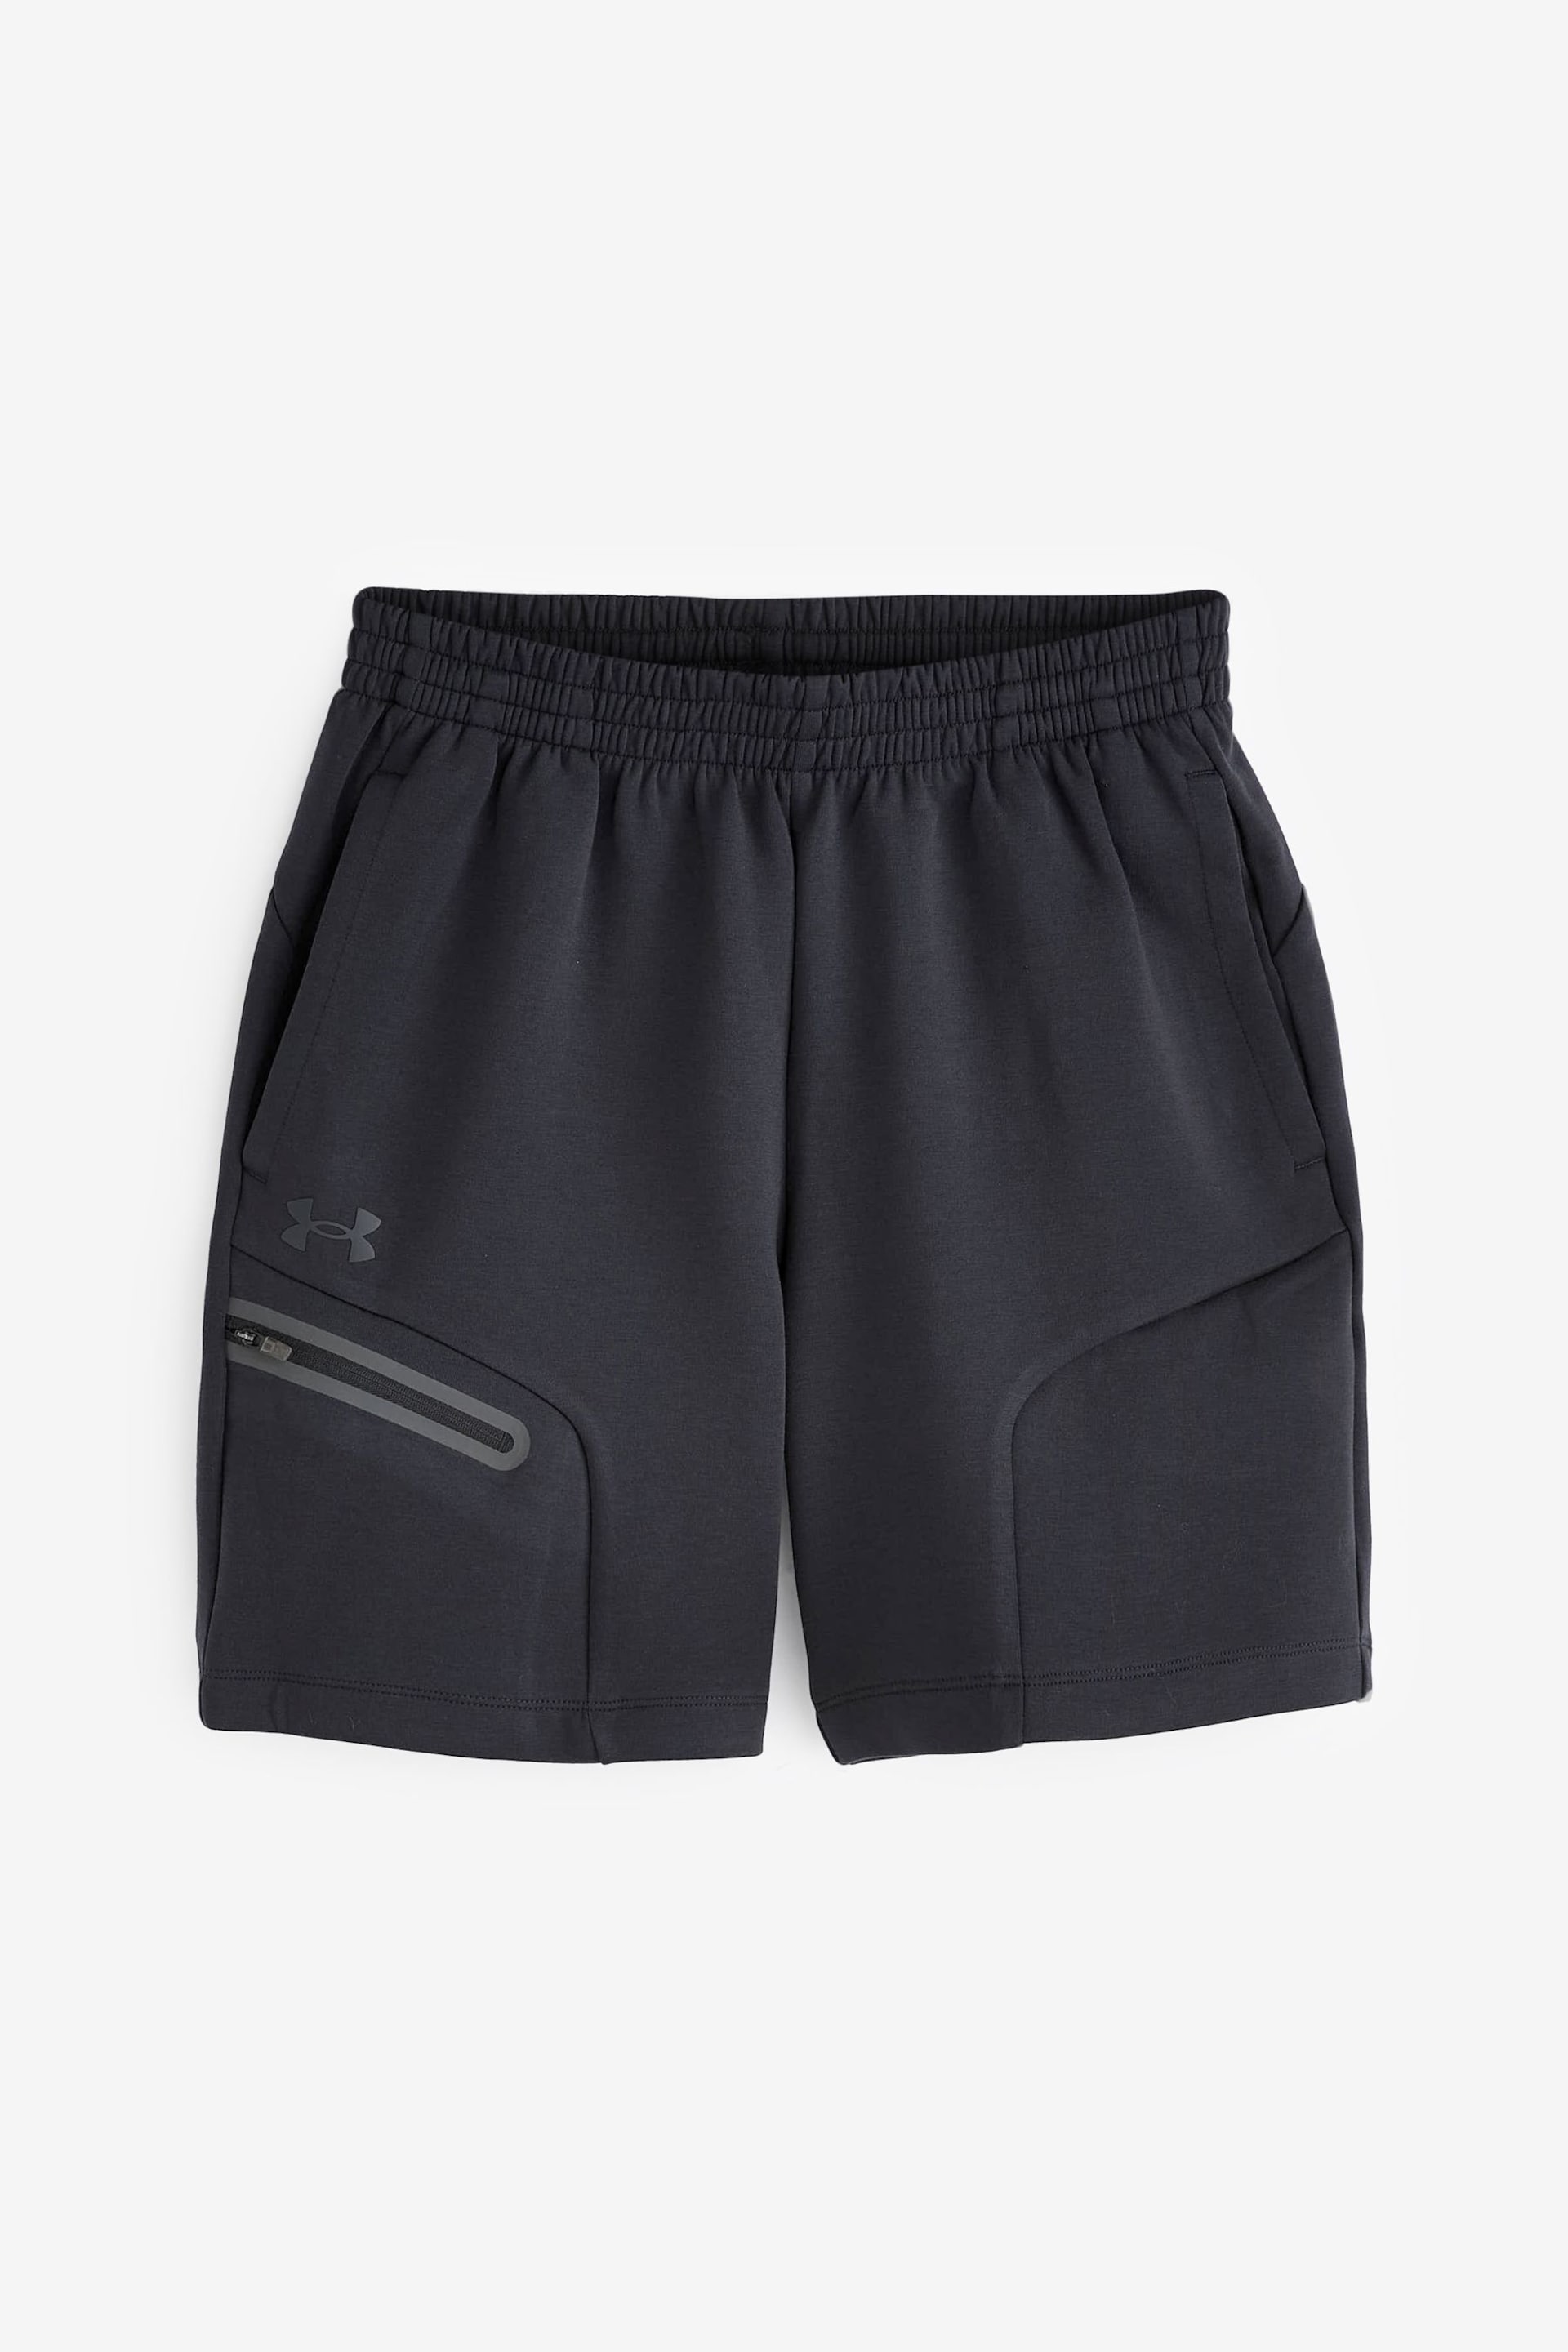 Under Armour Unstoppable Fleece Shorts - Image 2 of 2